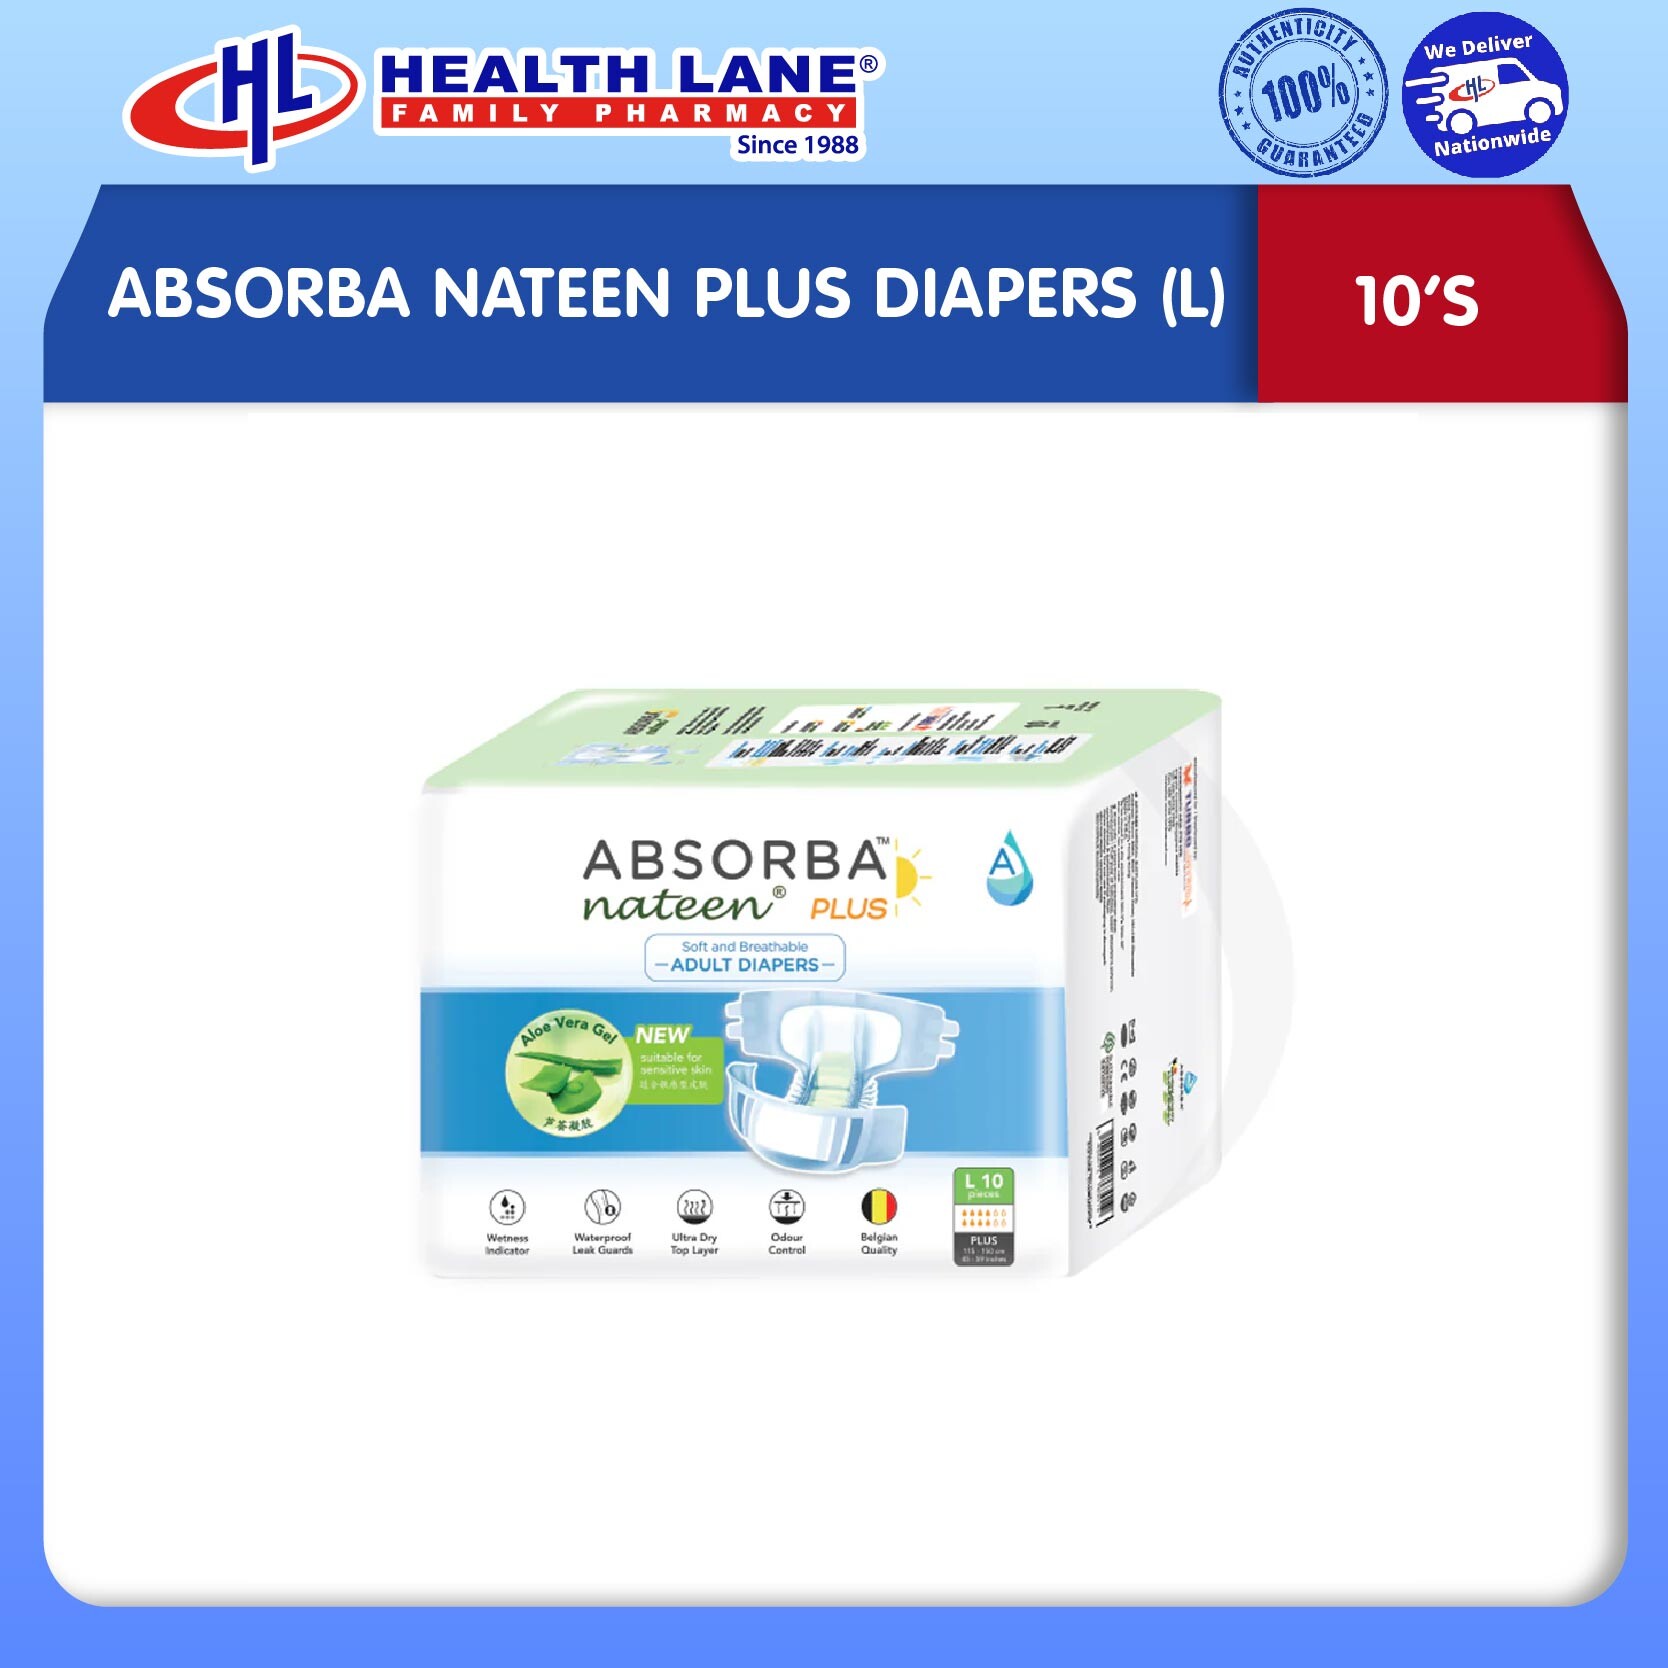 ABSORBA NATEEN PLUS DIAPERS (L) 10'S